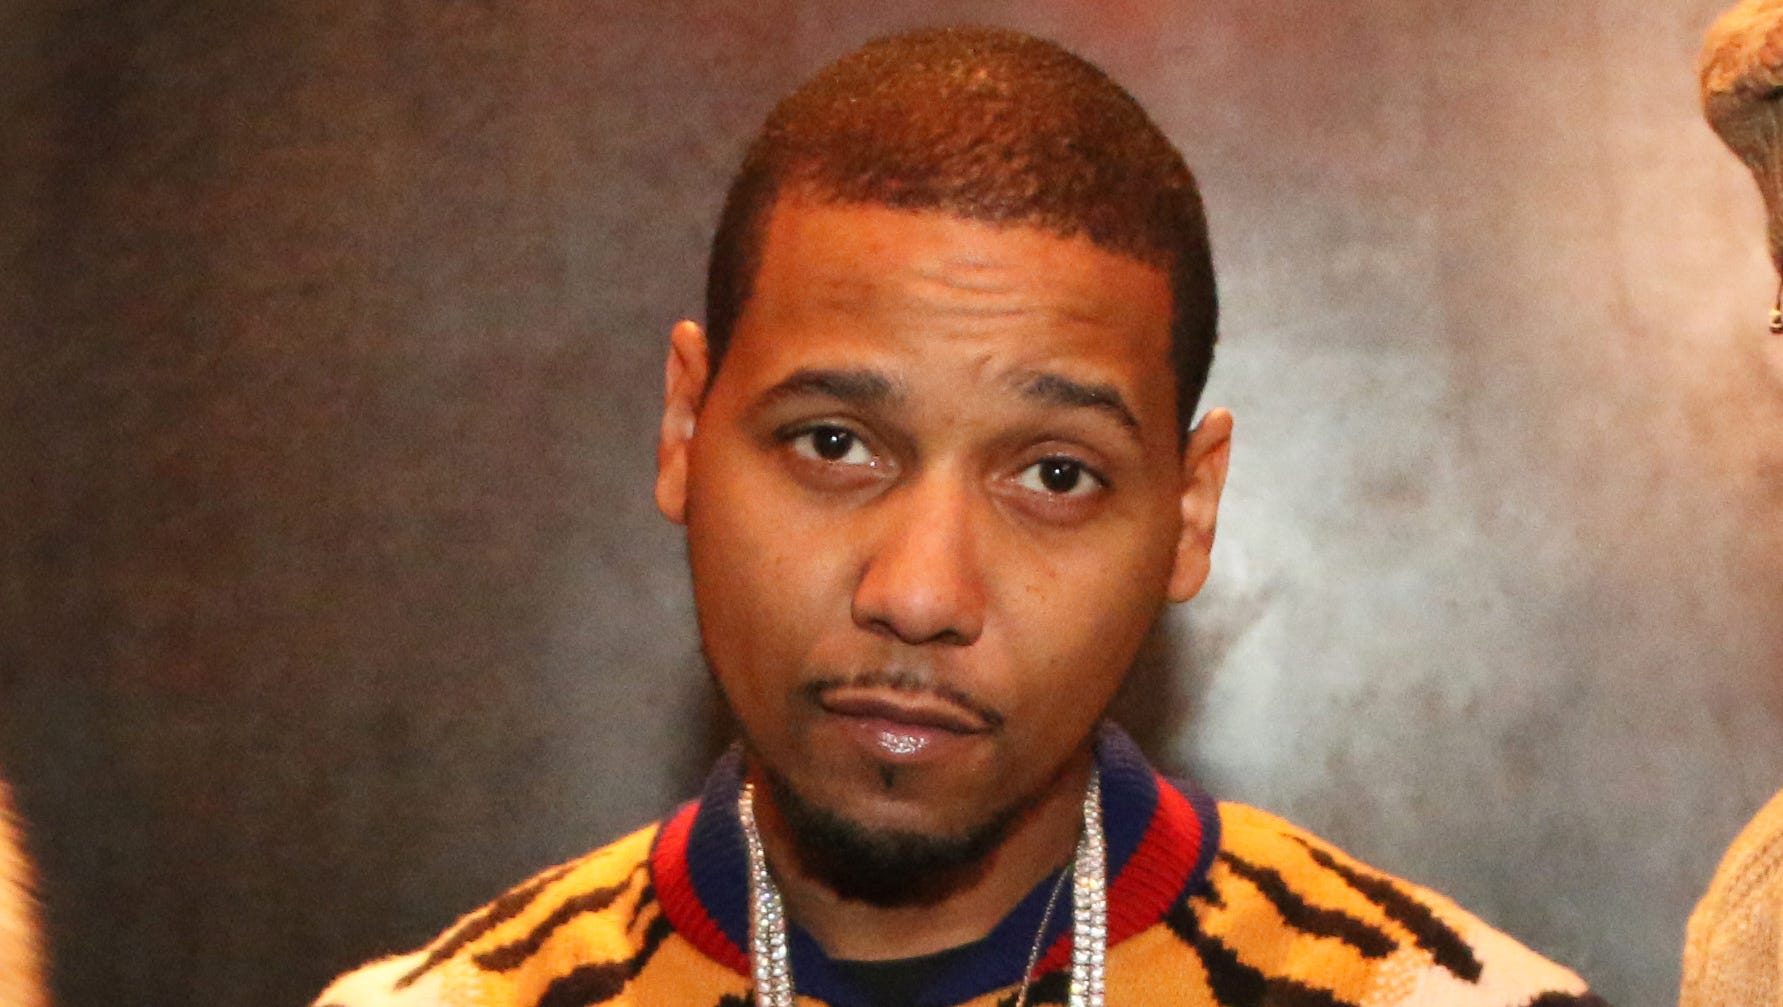 Juelz Santana Pleads Not Guilty To Charges From Newark Airport Case